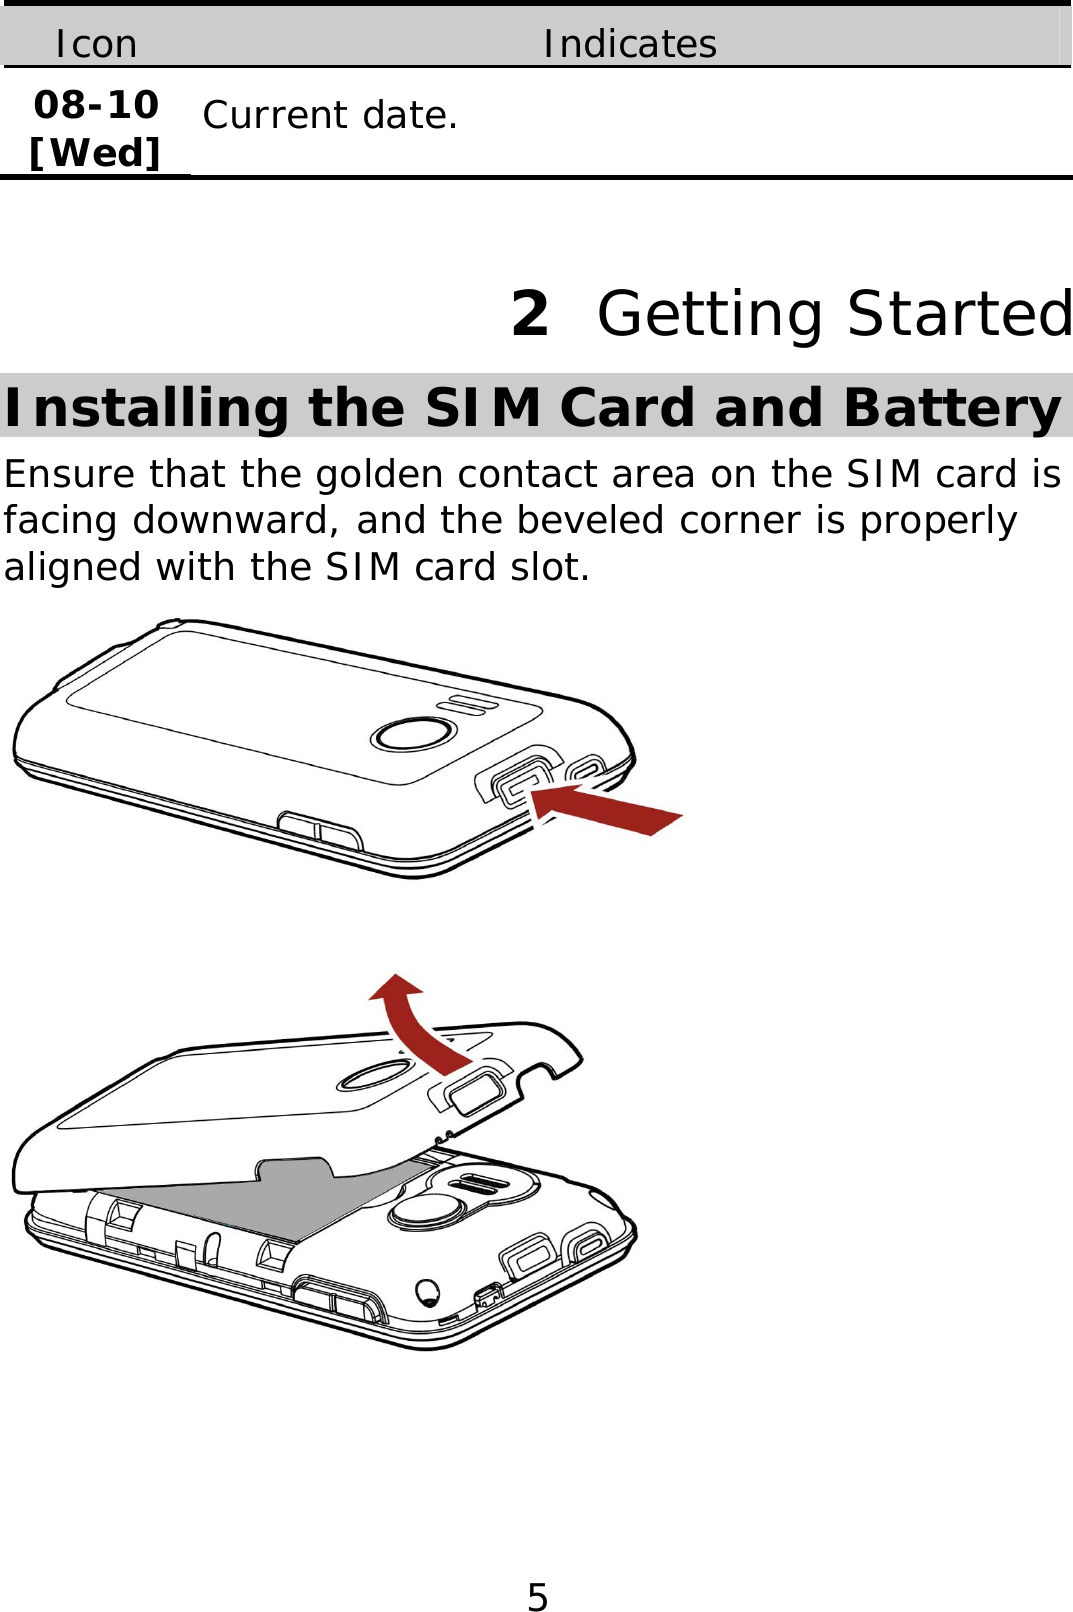 5 Icon  Indicates 08-10 [Wed] Current date.  2  Getting Started Installing the SIM Card and Battery Ensure that the golden contact area on the SIM card is facing downward, and the beveled corner is properly aligned with the SIM card slot.     